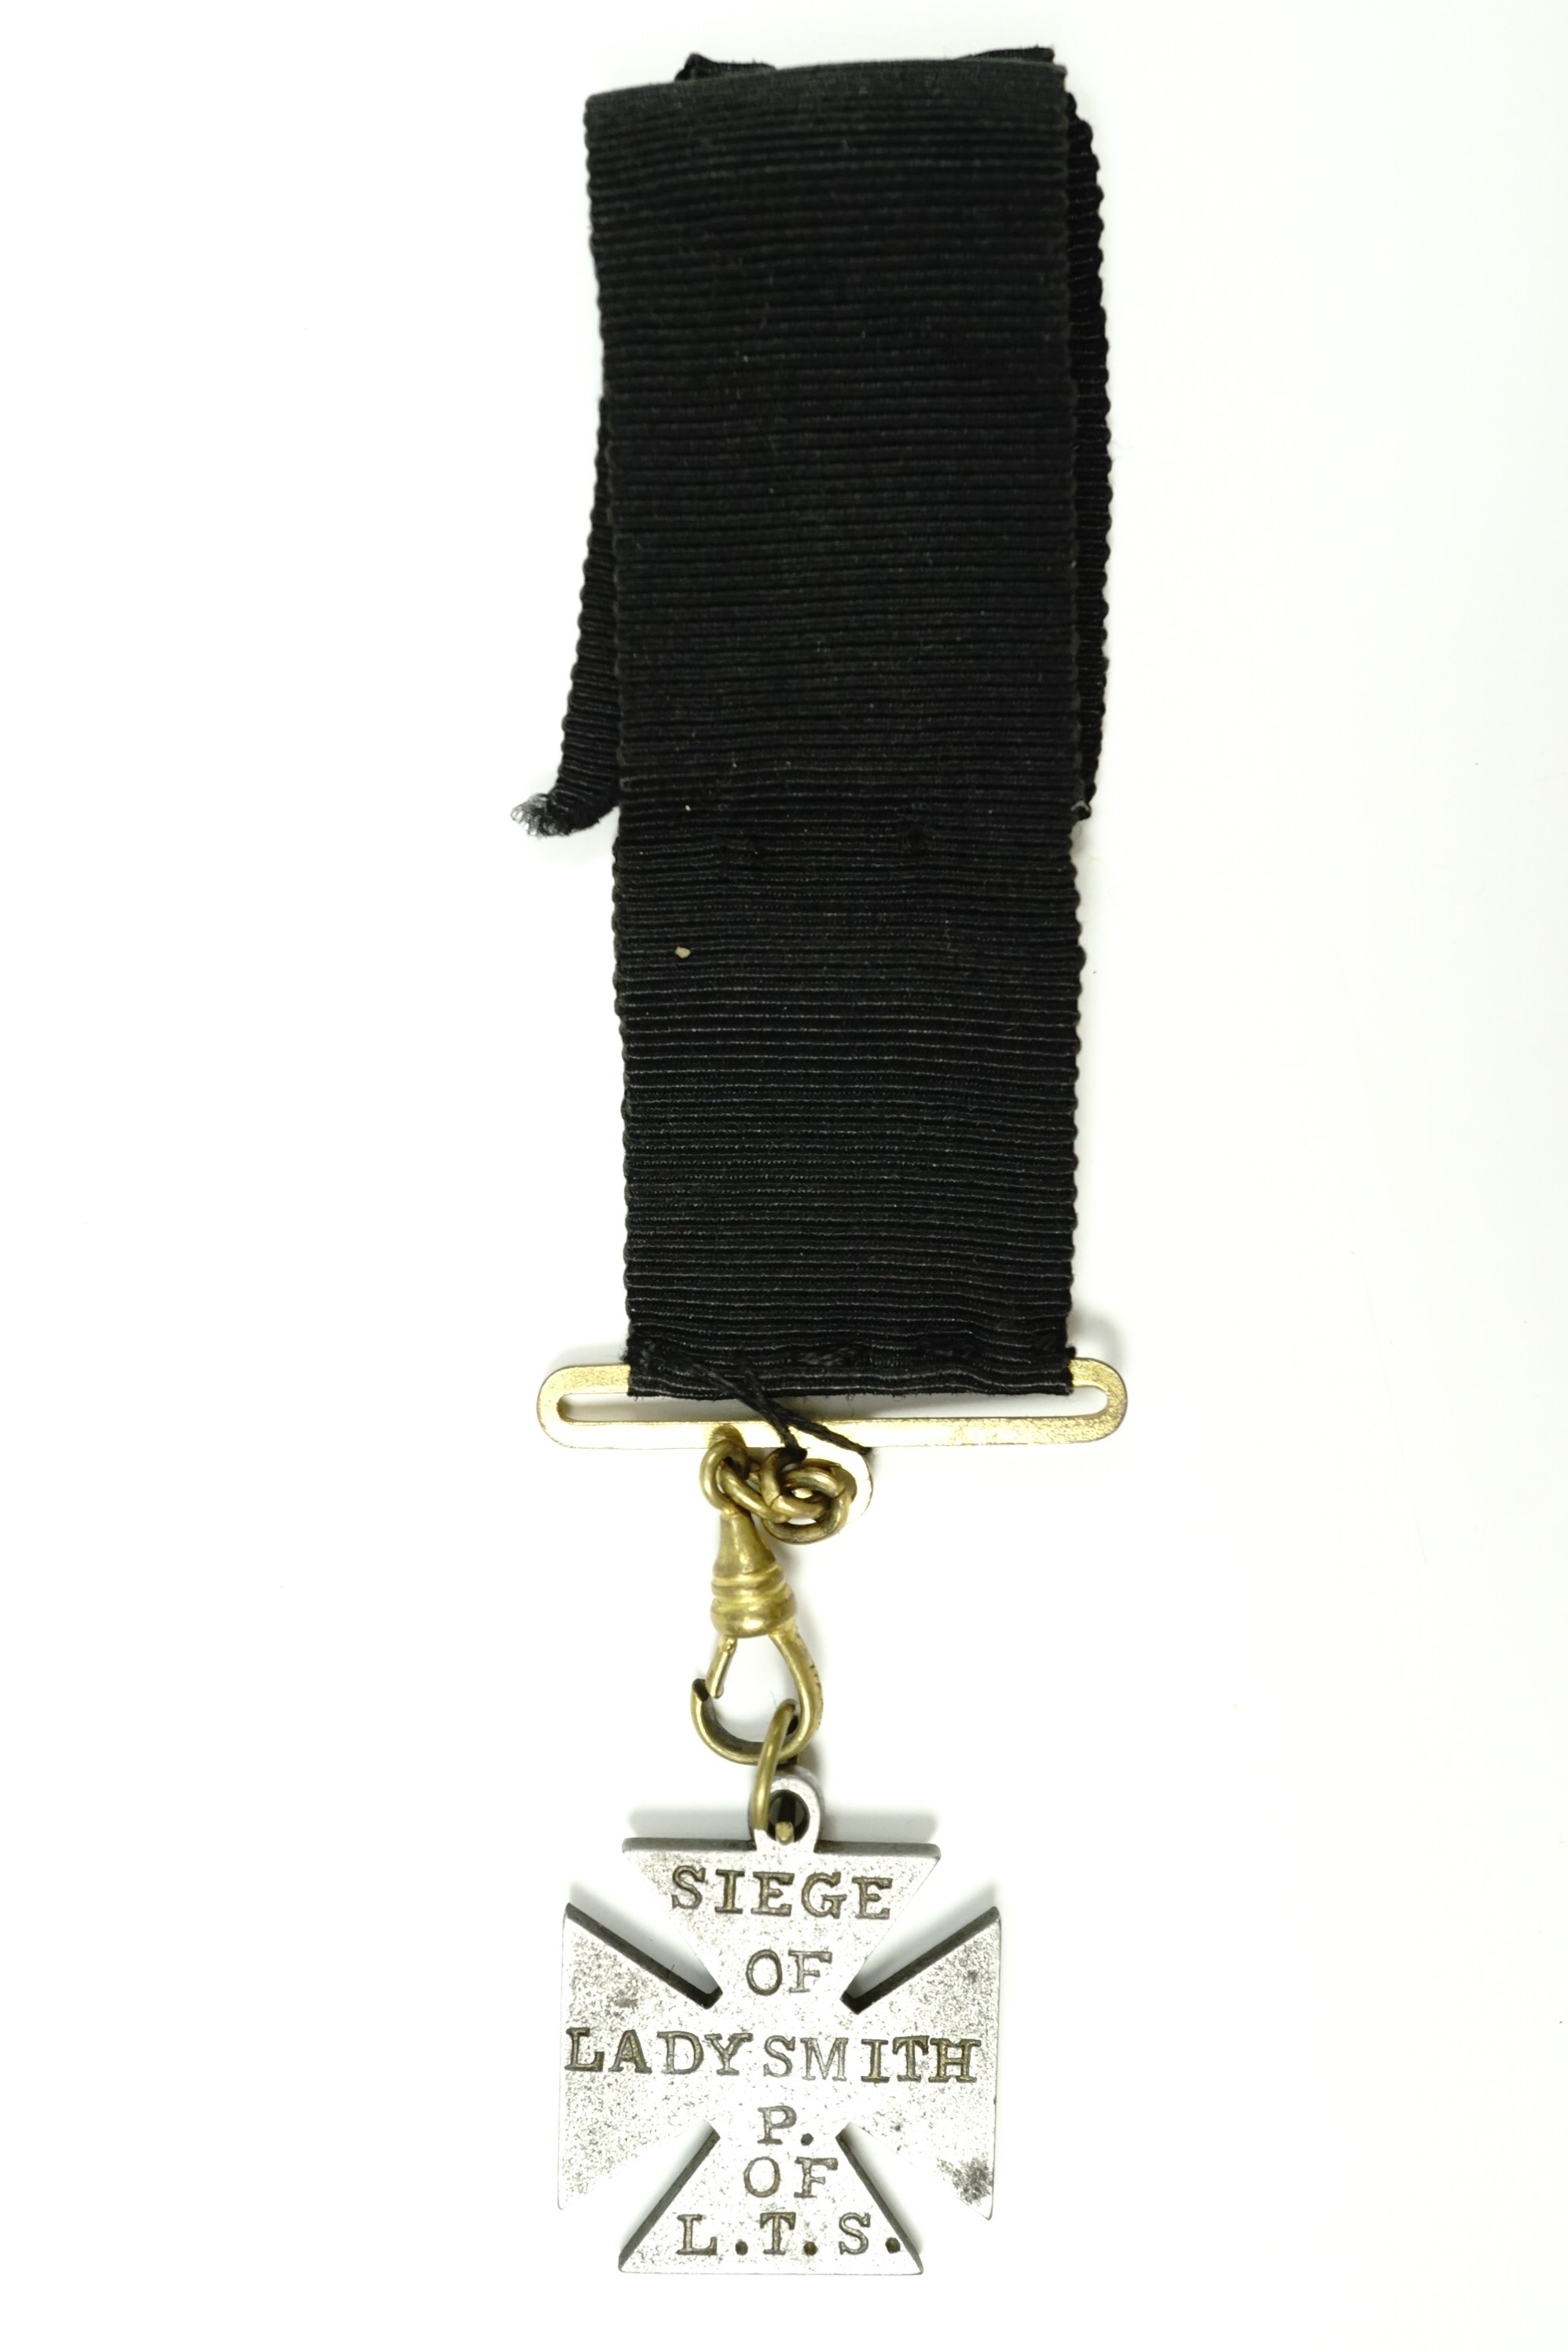 A Boer War period steel watch chain fob medallion in the form of a cross and bearing the struck